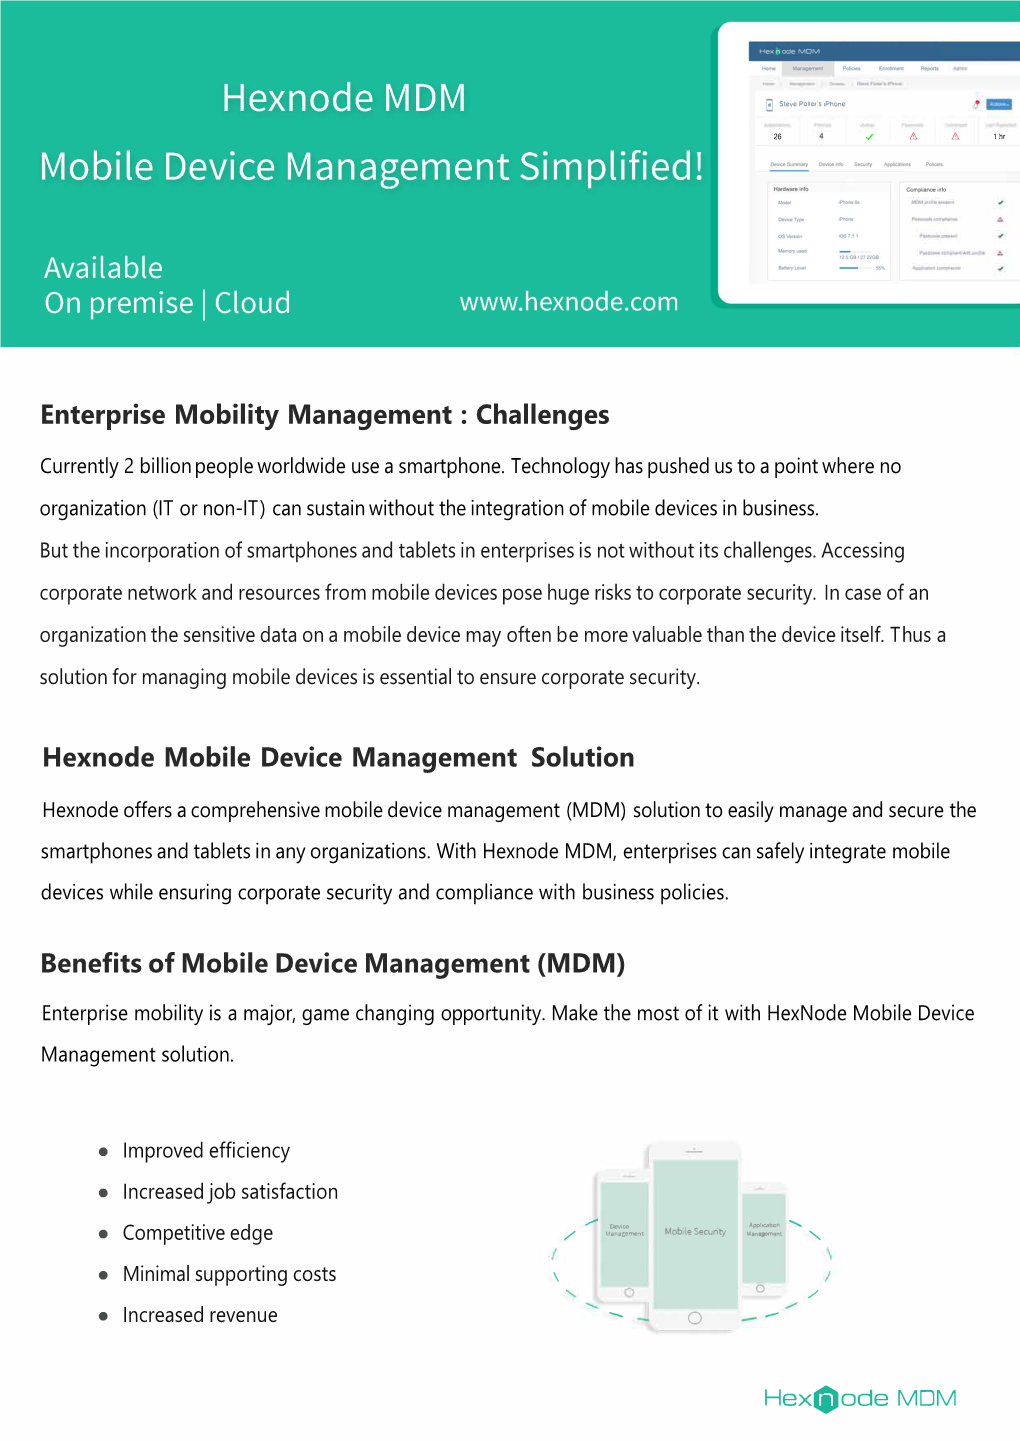 Mobile Device Management from Hexnode